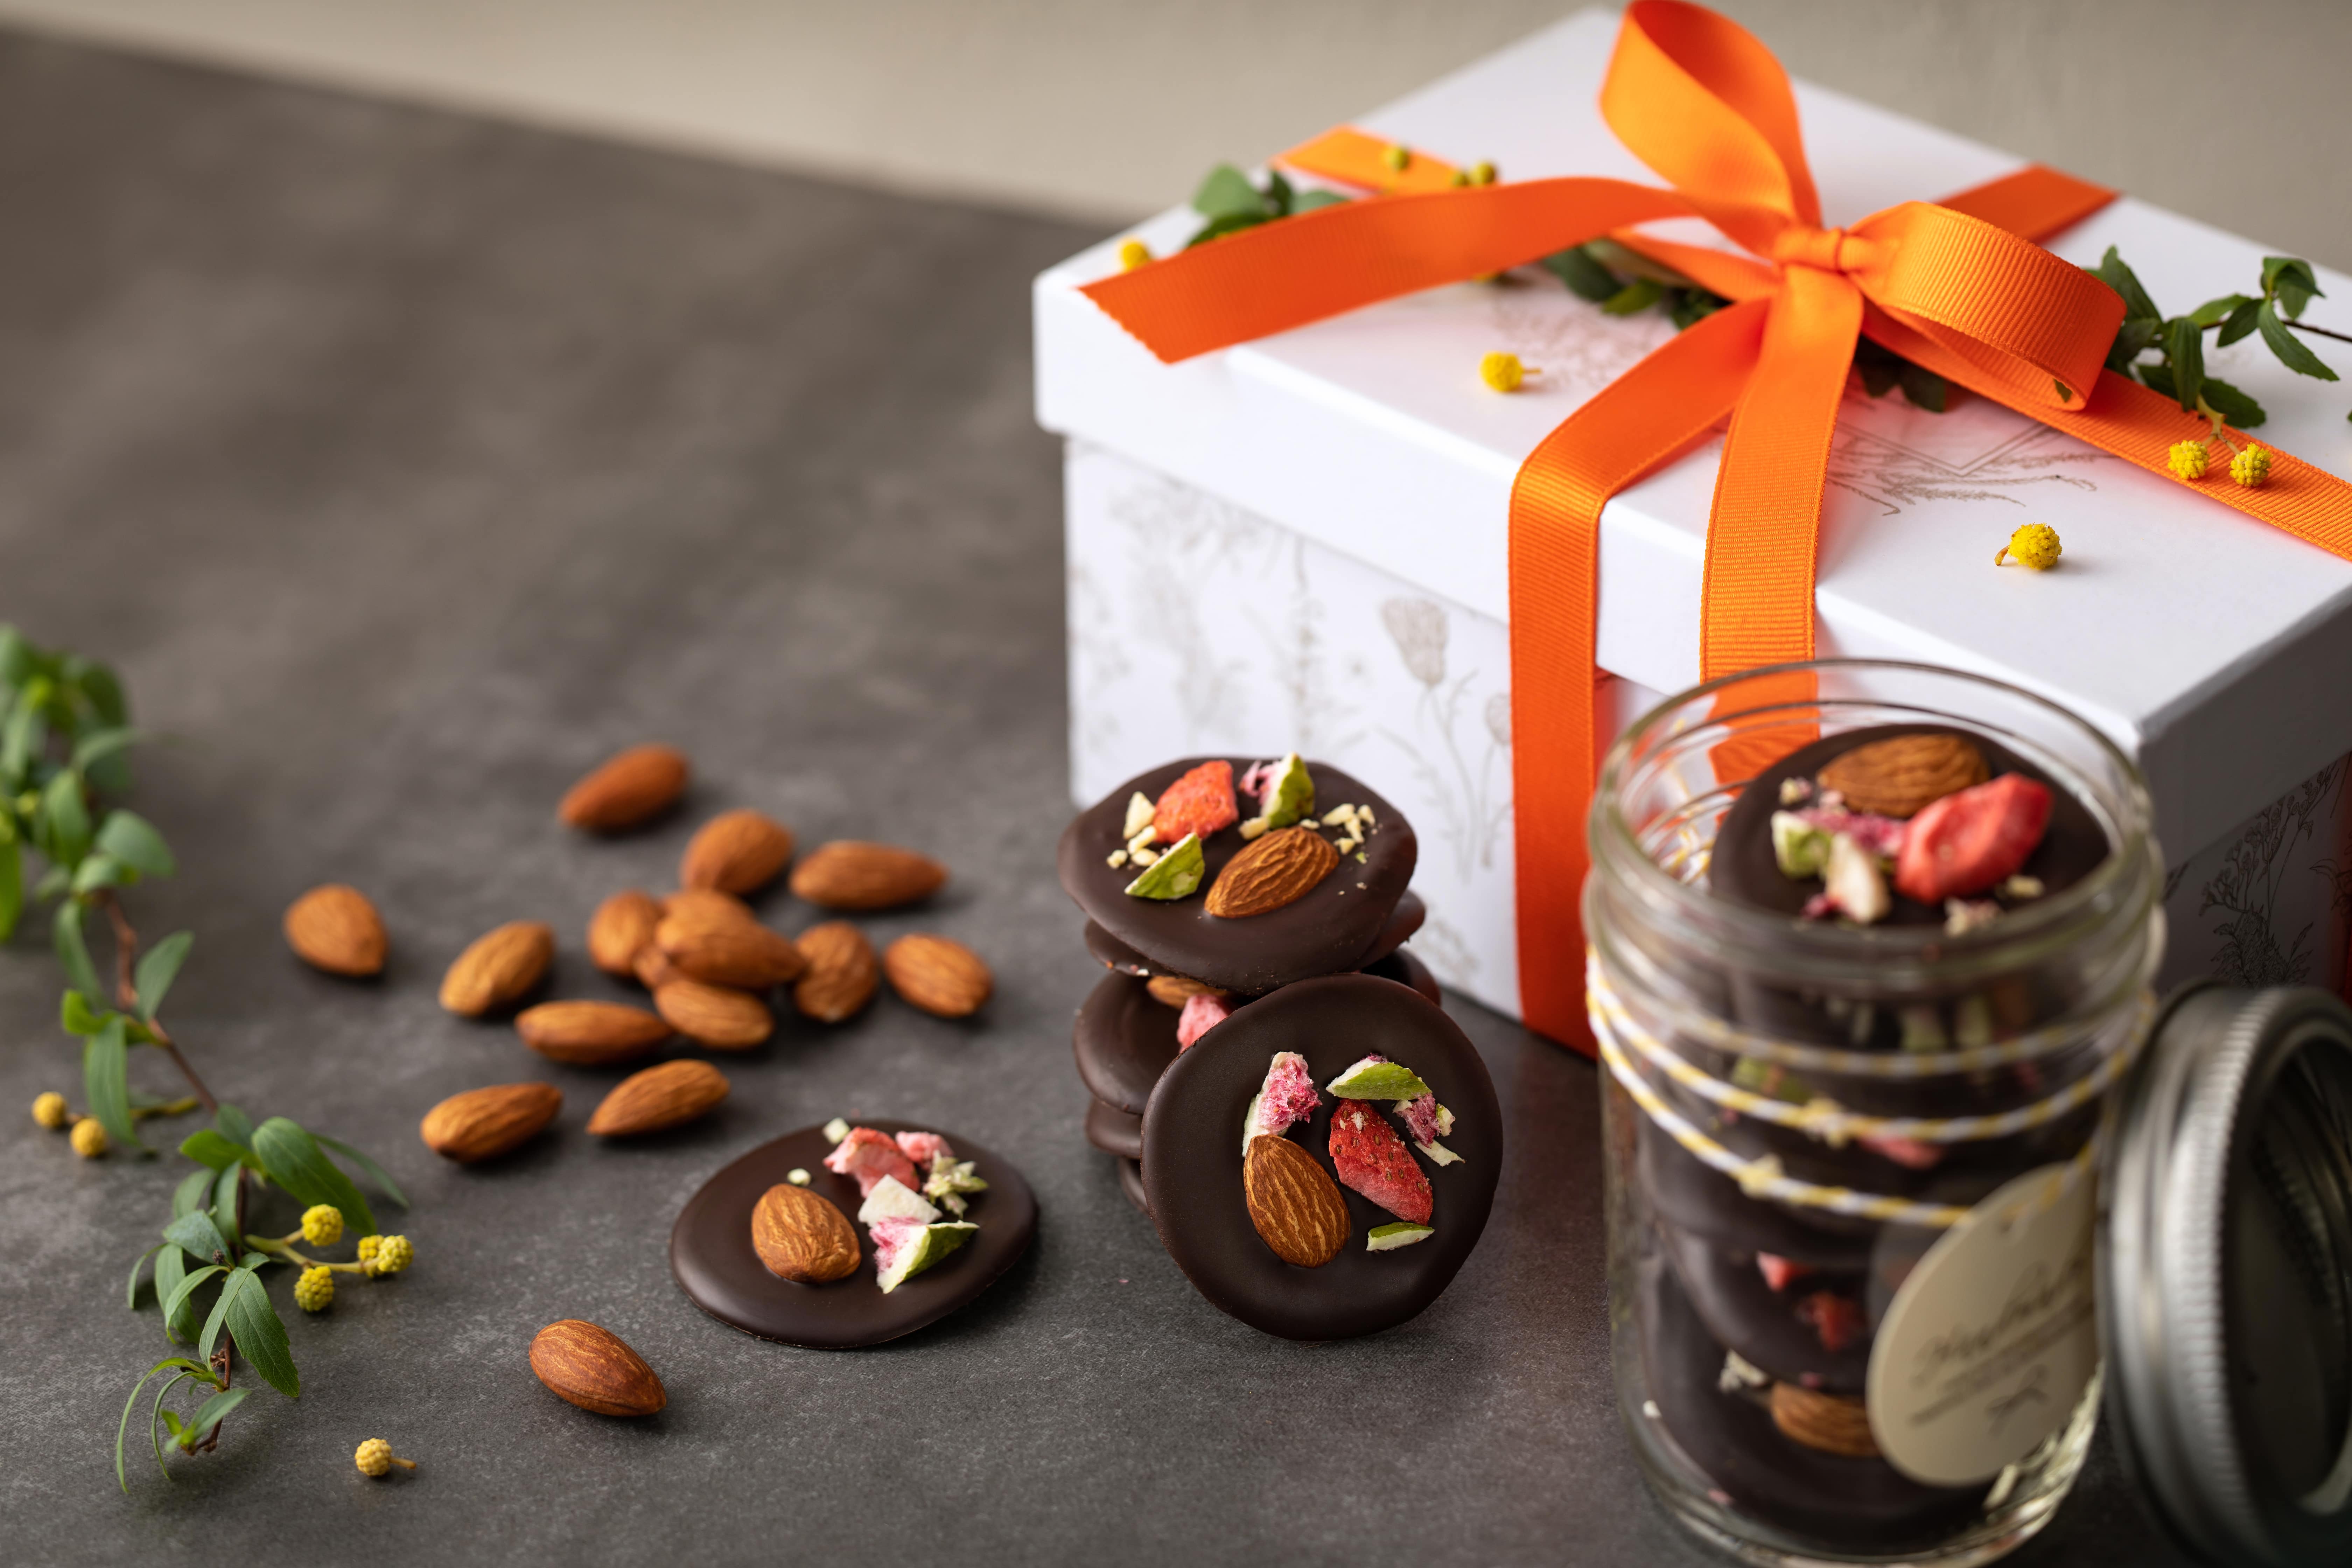 This Raksha Bandhan, Give Your Loved Ones the Gift of Health, With a Box Full of Almonds!